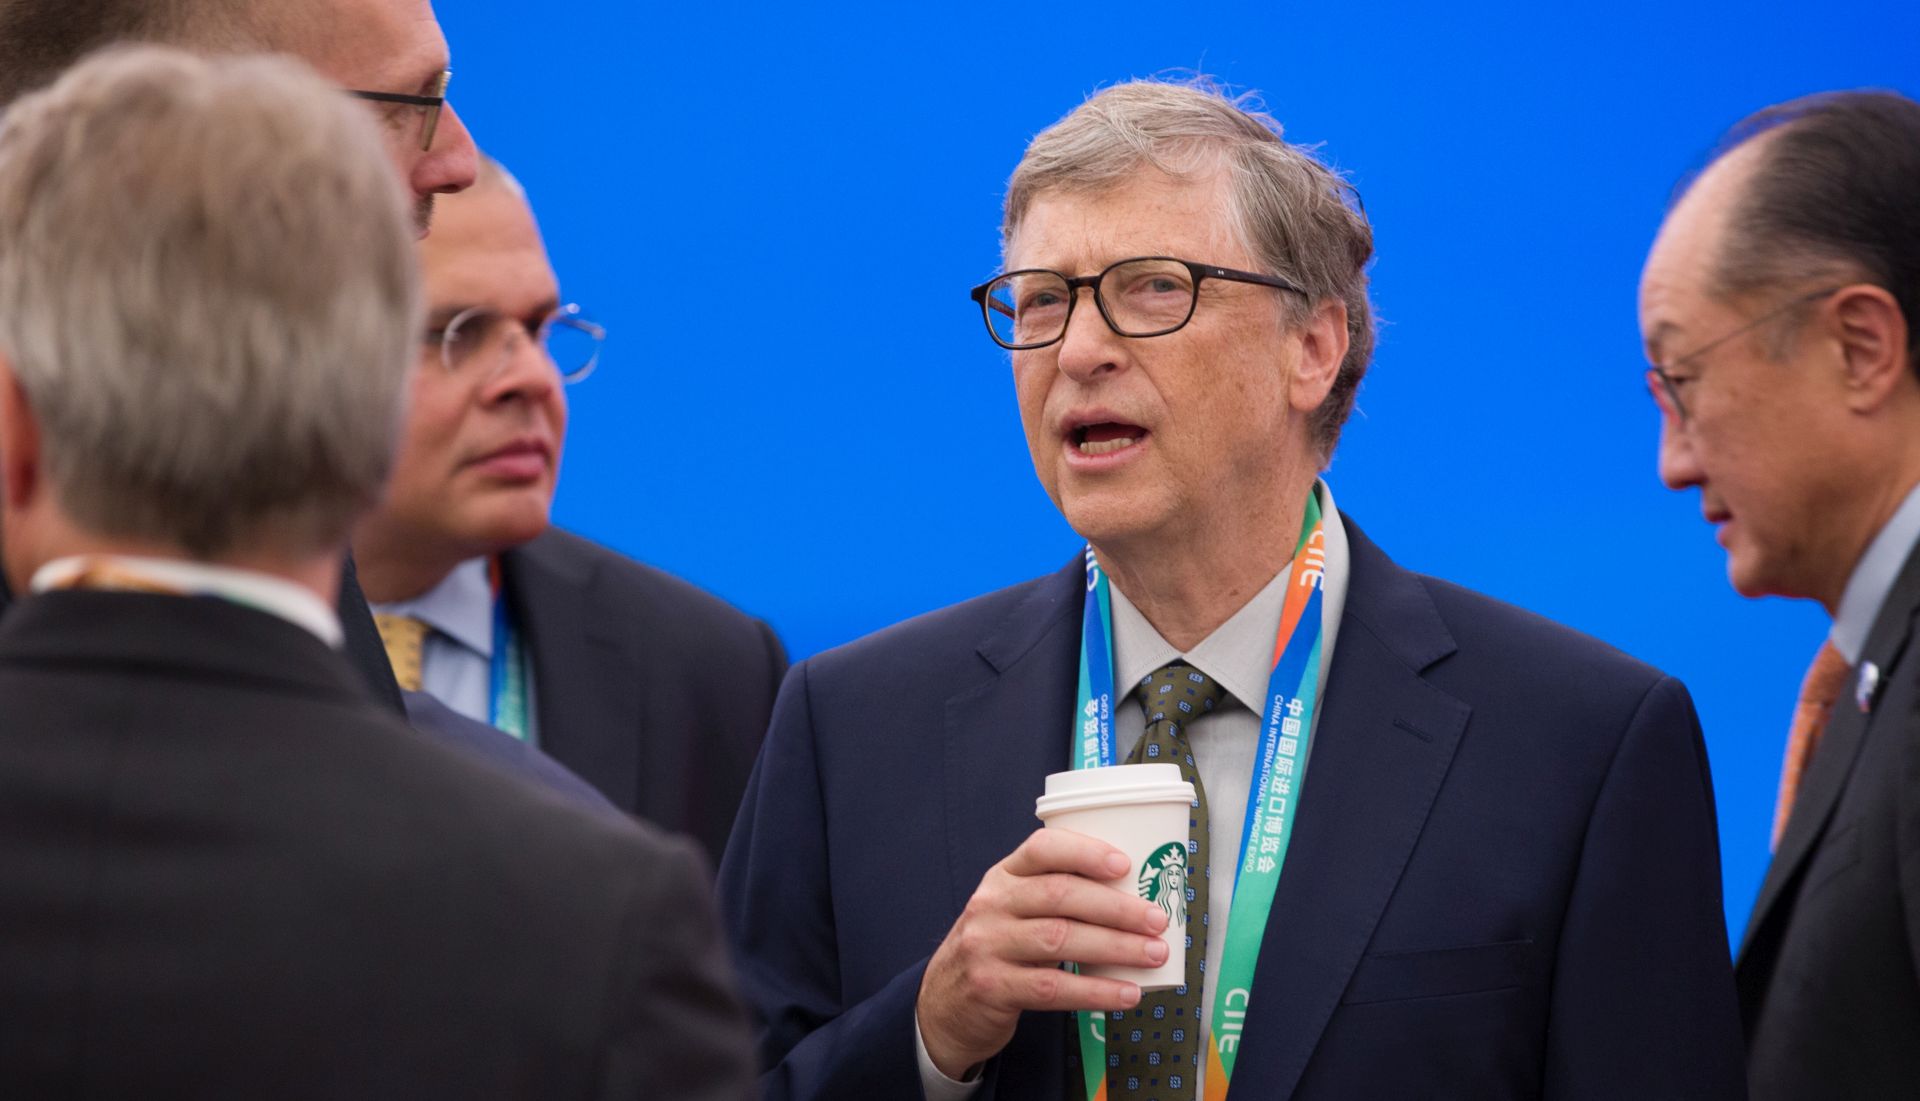 epa07142295 Microsoft founder Bill Gates (C) attends the opening ceremony of the China International Import Expo (CIIE) in Shanghai, China, 05 November 2018. High Chinese and foreign officials attended the event which runs from 05 to 10 November 2018 in Shanghai.  EPA/STRINGER CHINA OUT